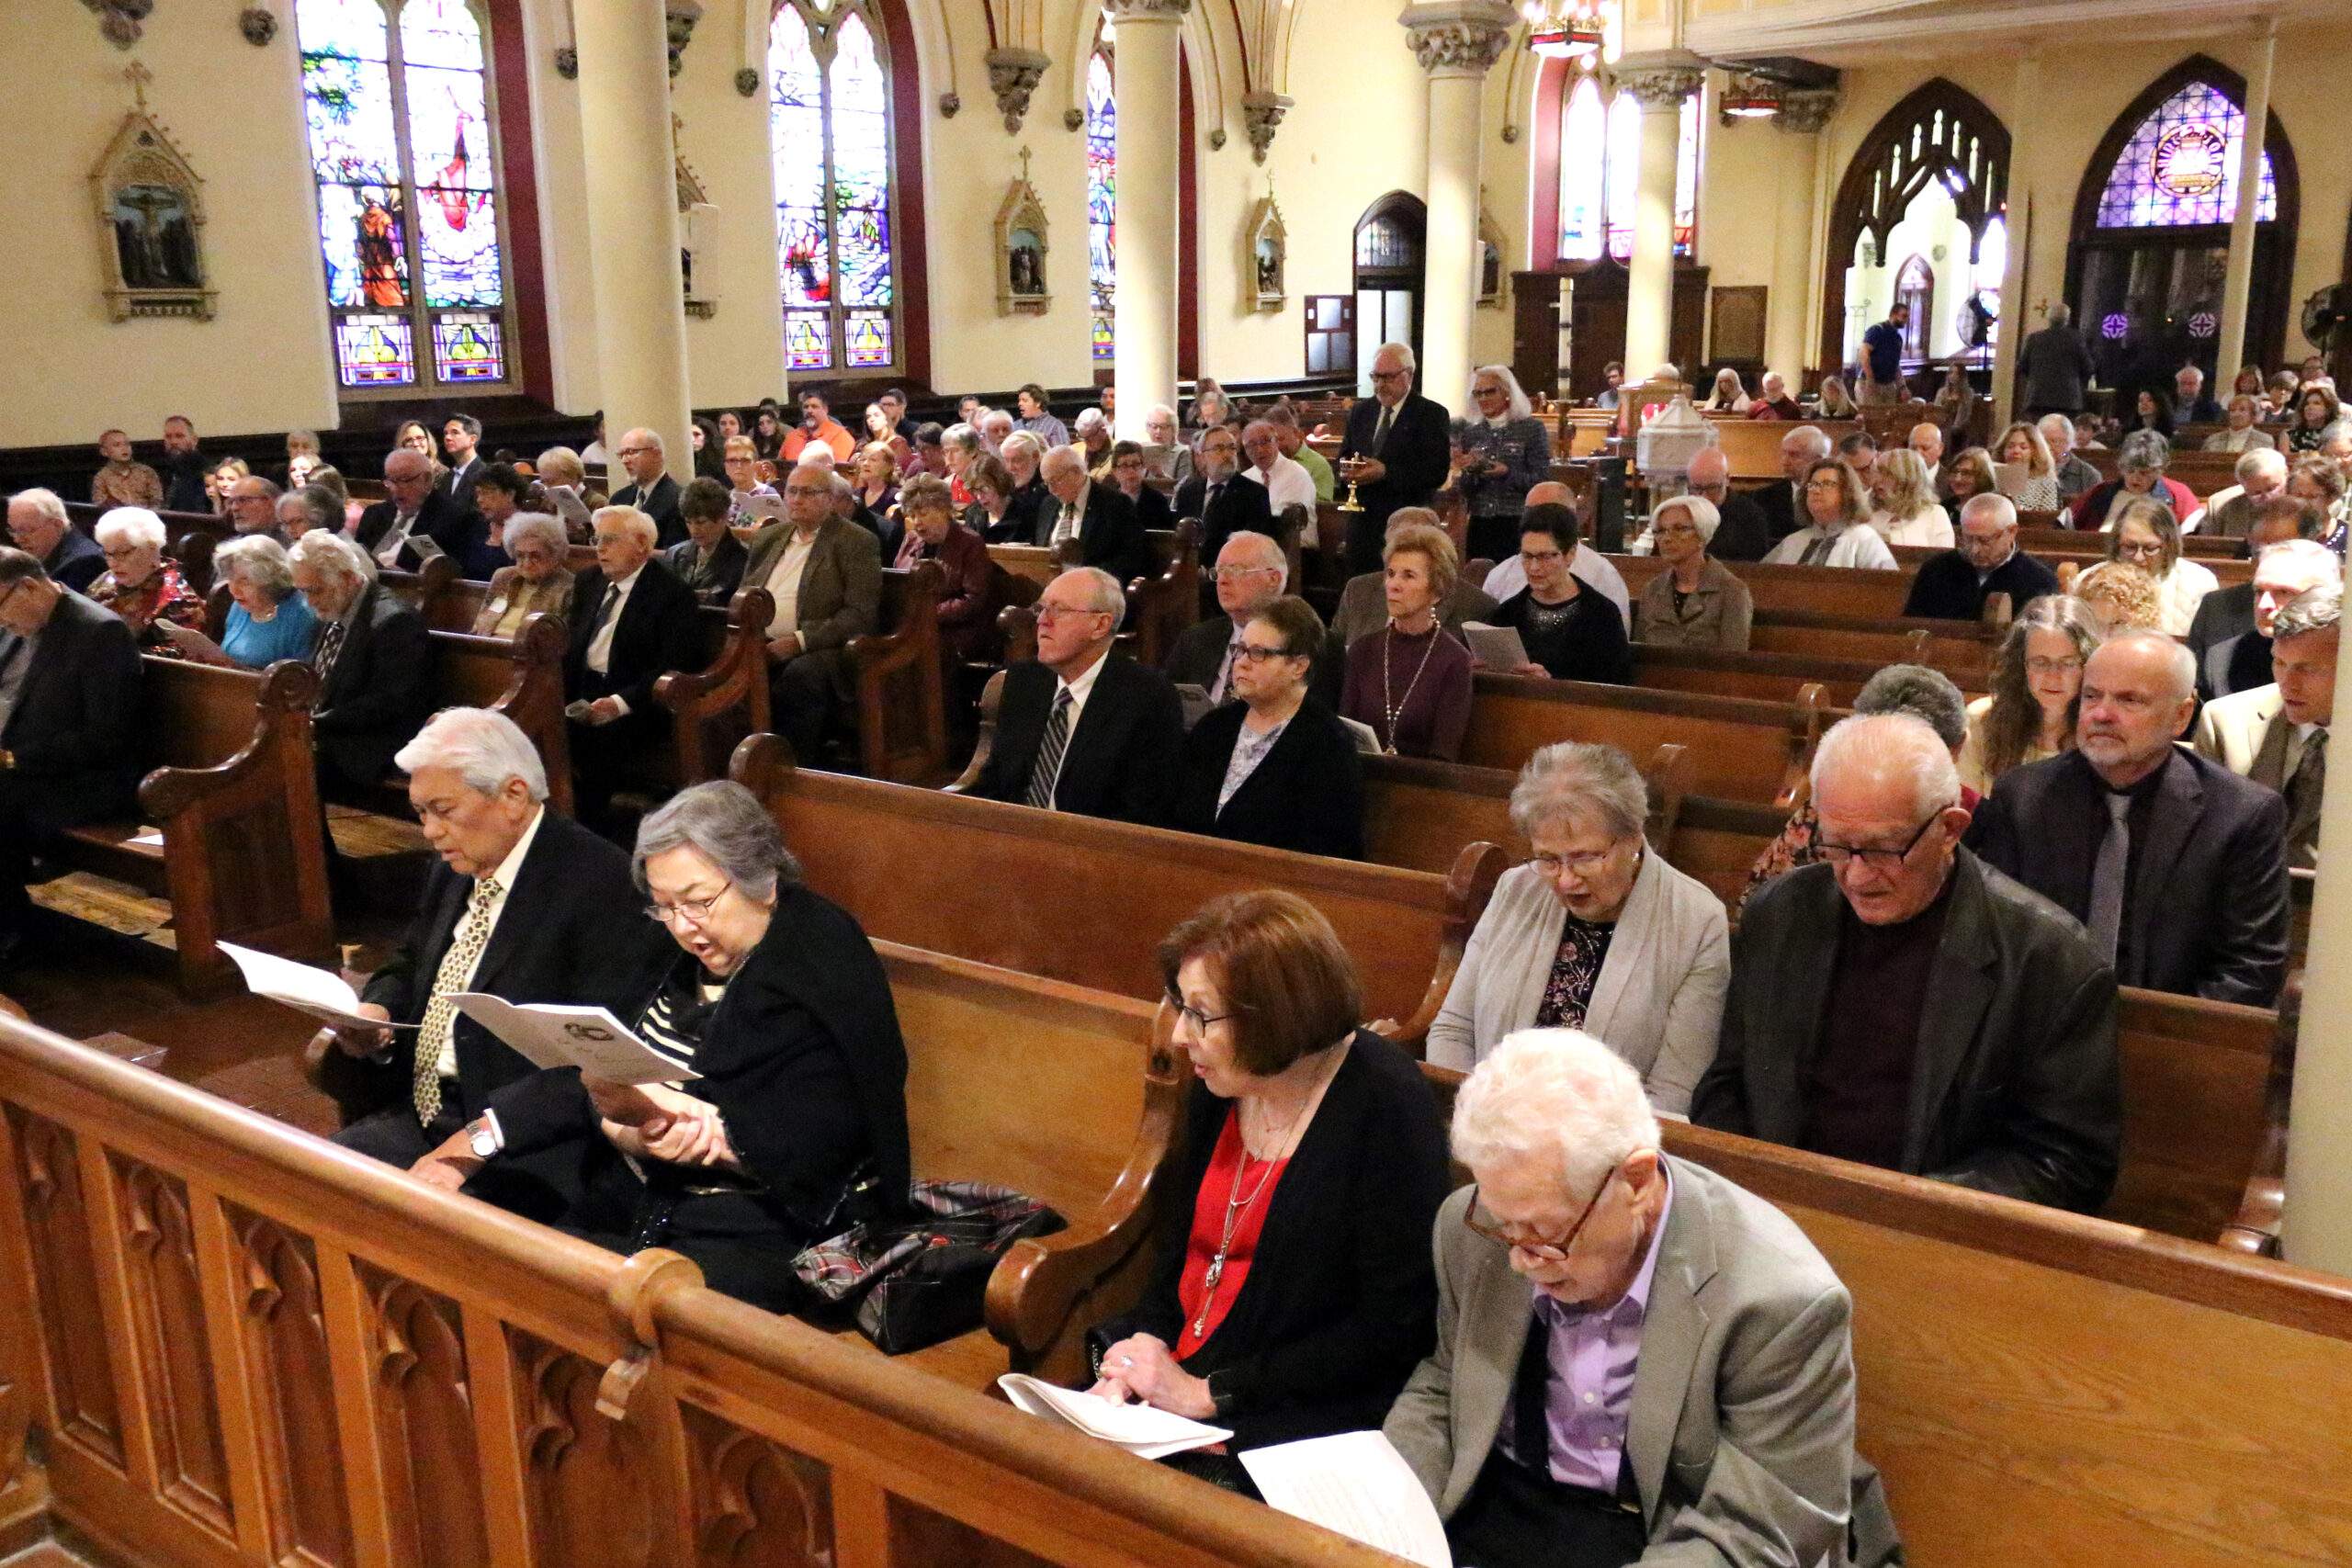 Parishioners sing from worship aids during Mass at St. John the Baptist Basilica